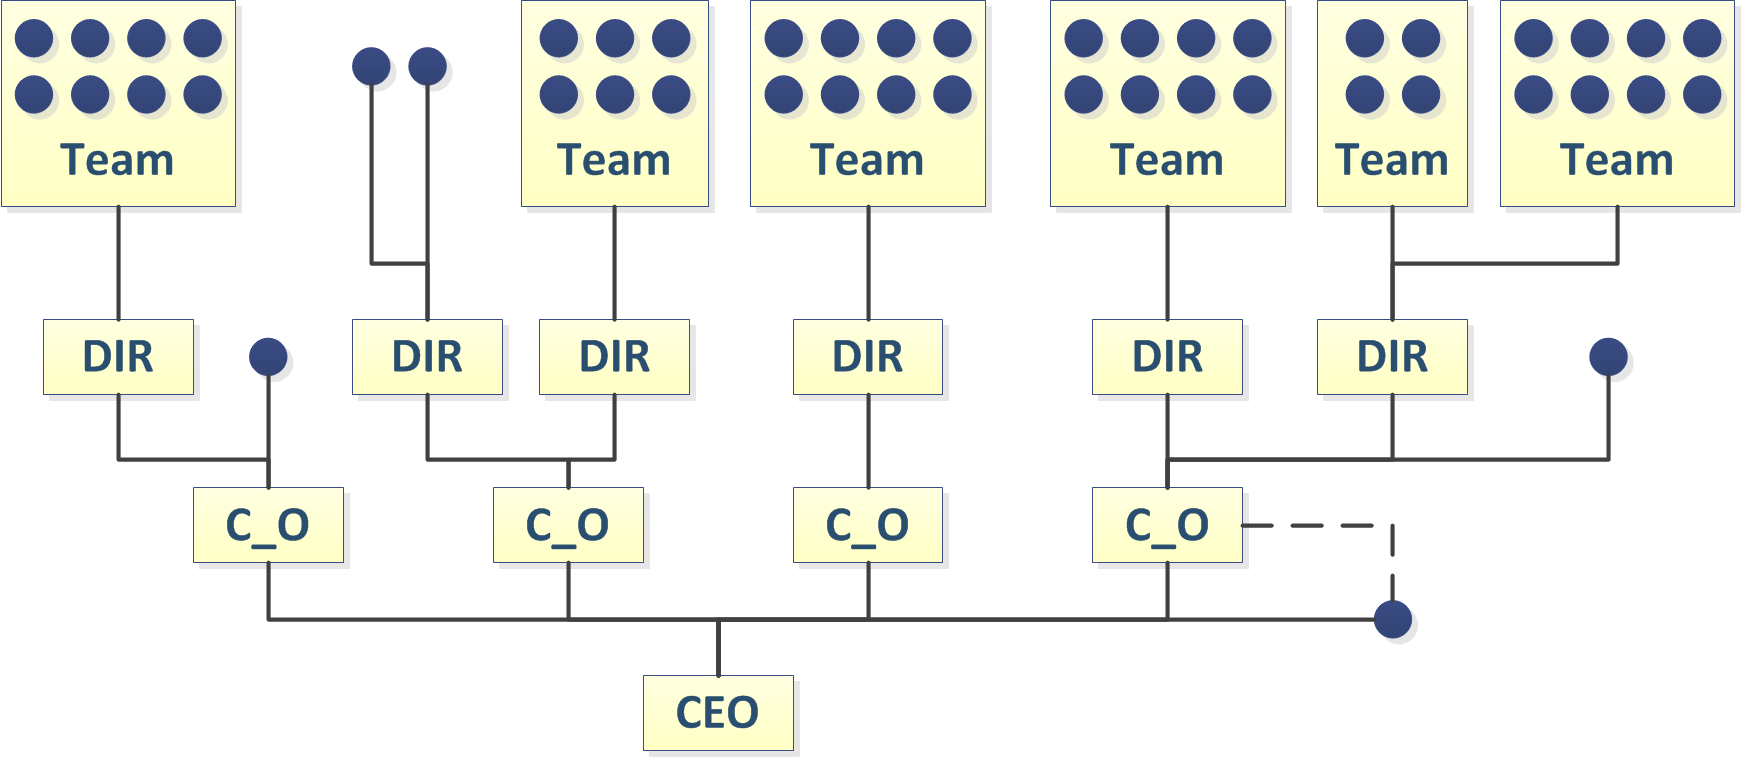 Inverted Org Chart Template